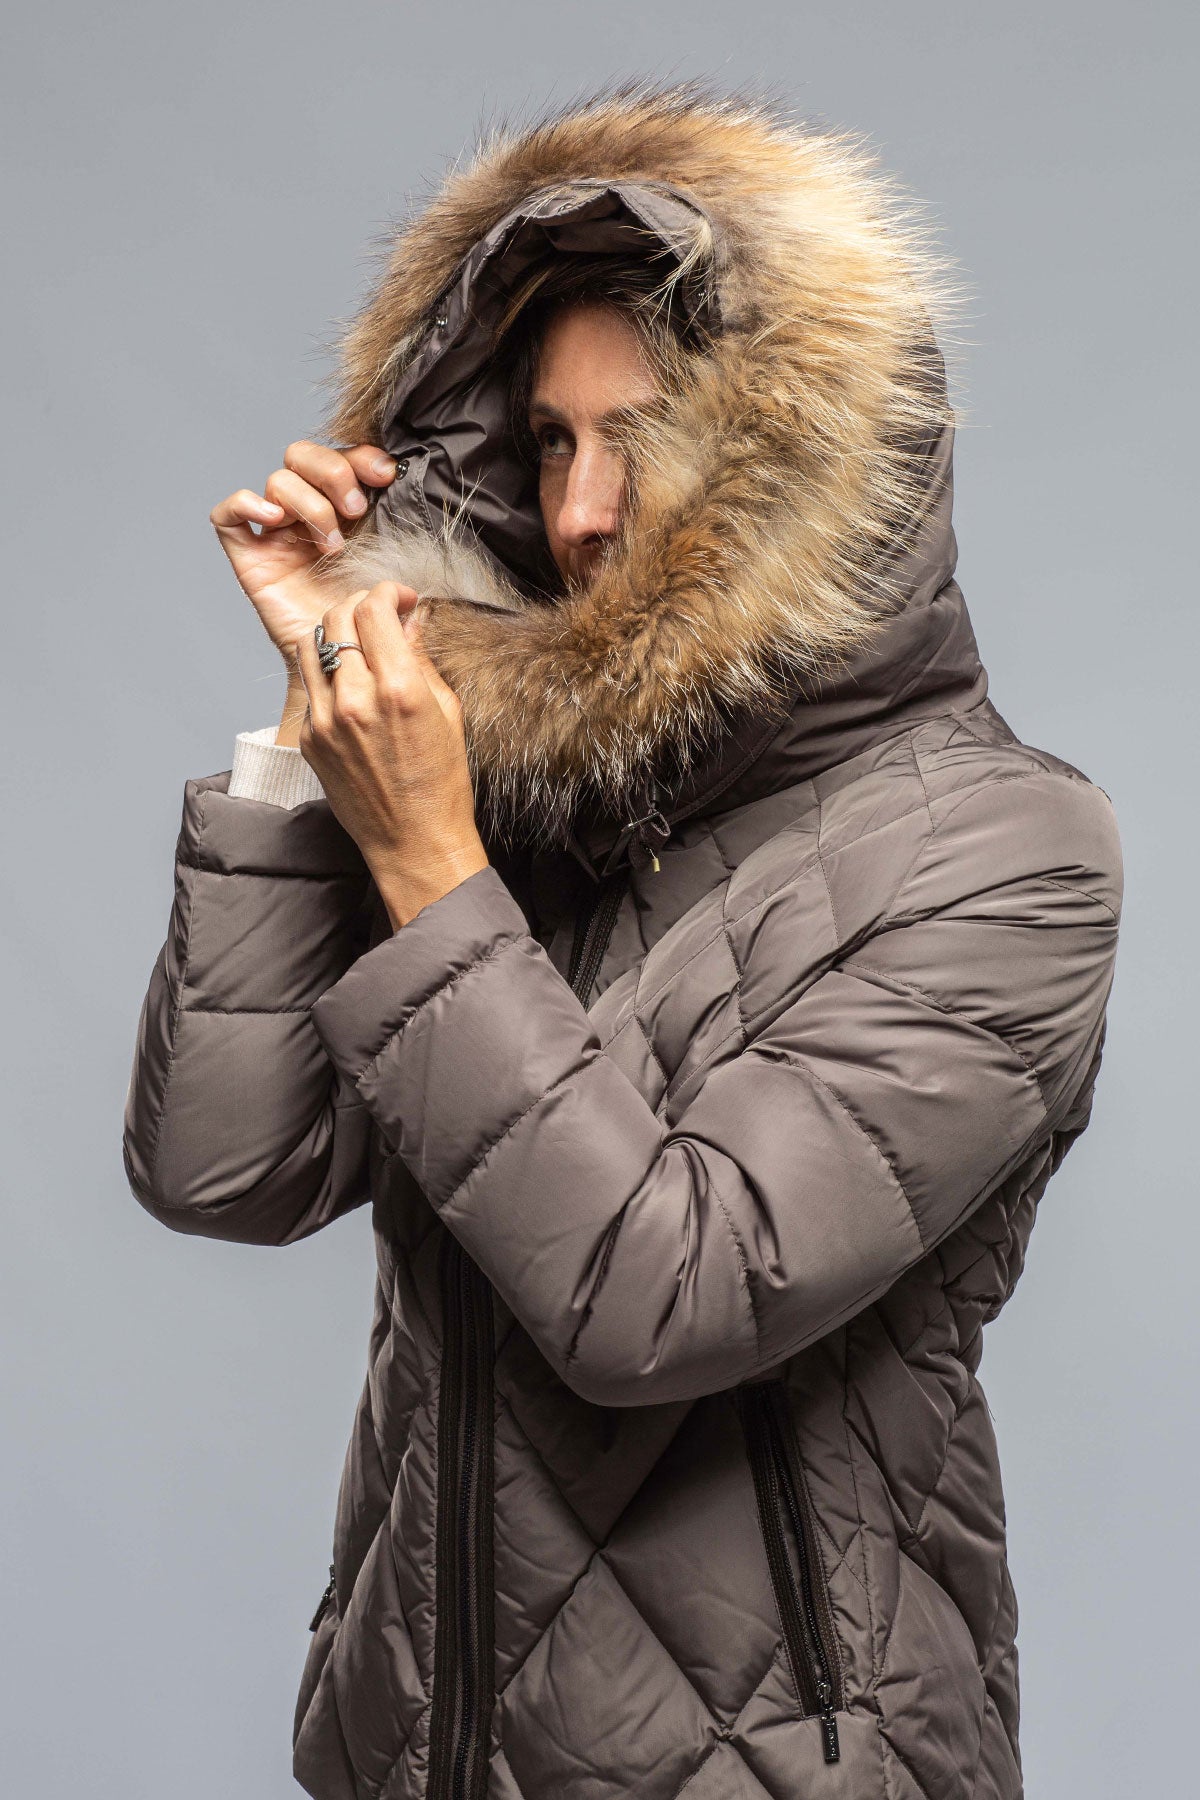 Cala Hooded Down Parka | Samples - Ladies - Outerwear - Cloth | Gimo's